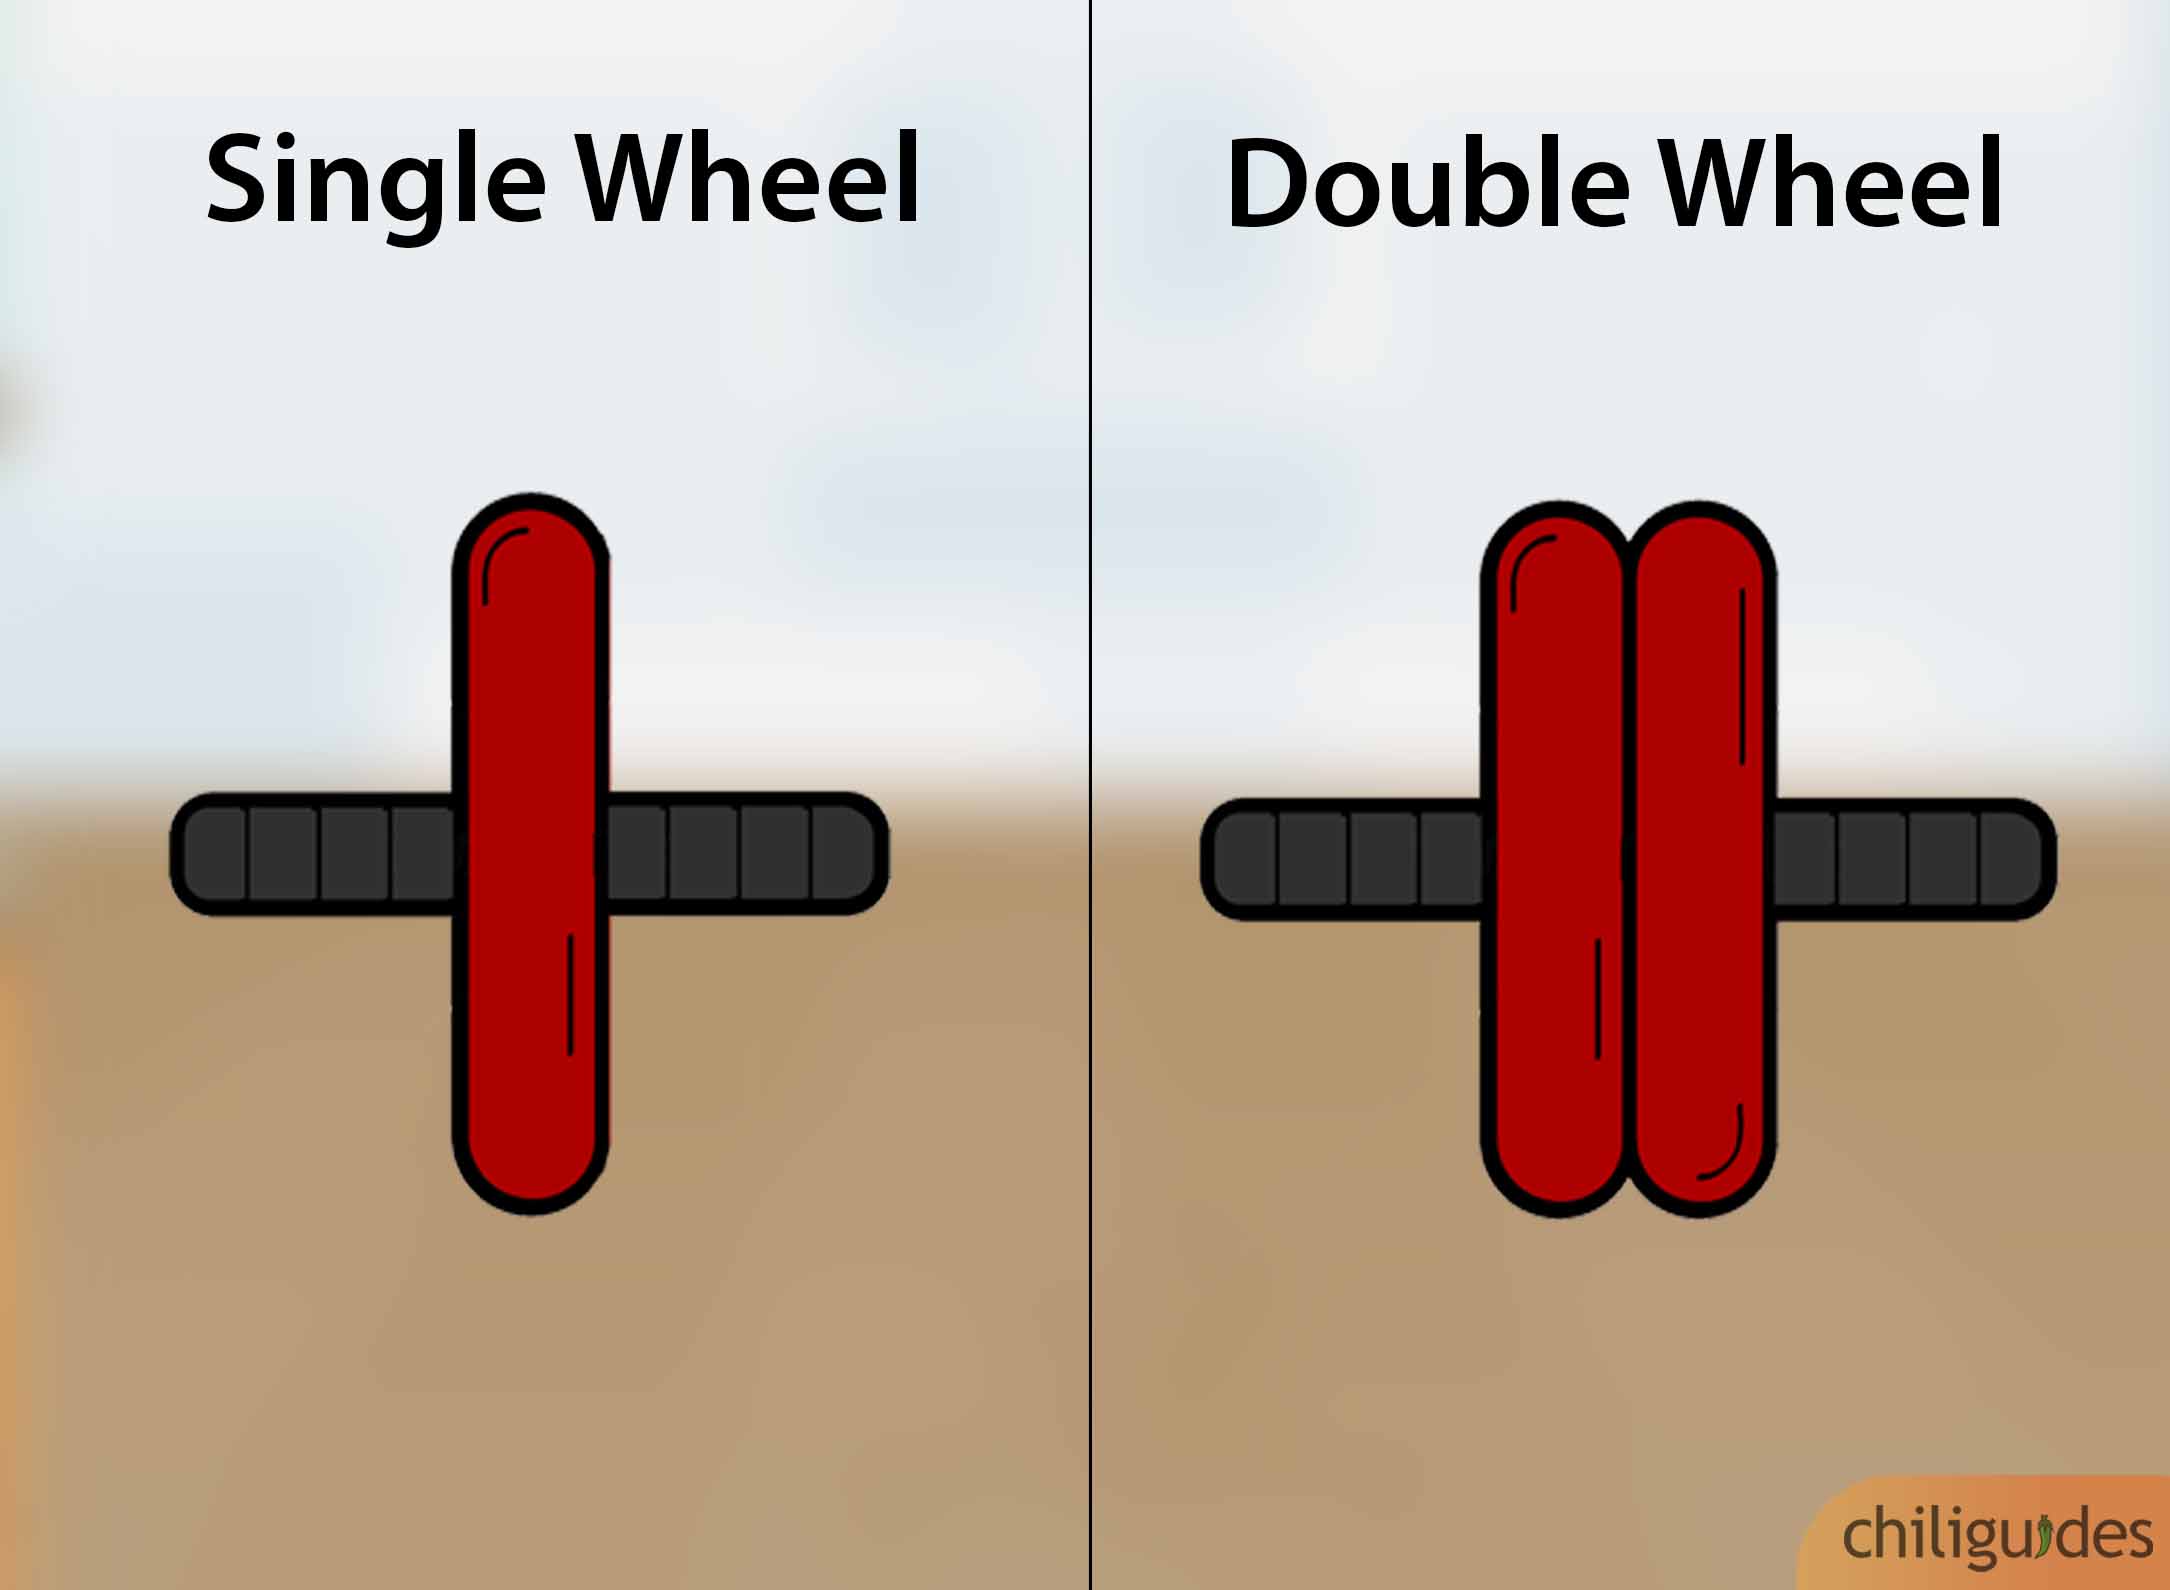 Go with a rubber lined double wheel if you’re a beginner.